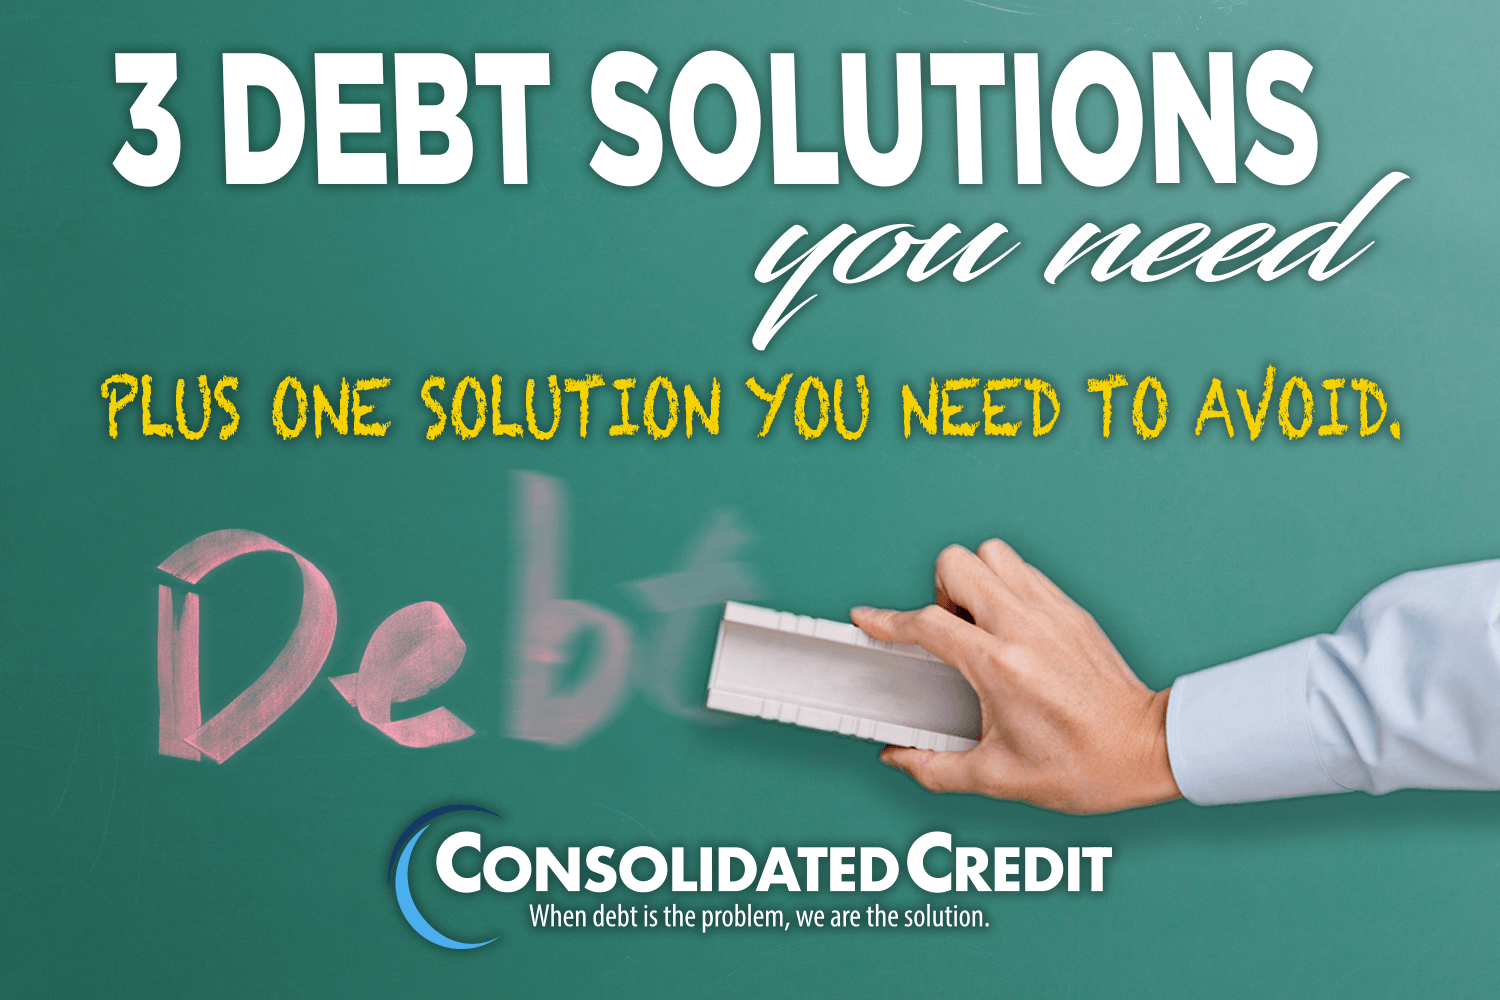 how can i solve my debt problems